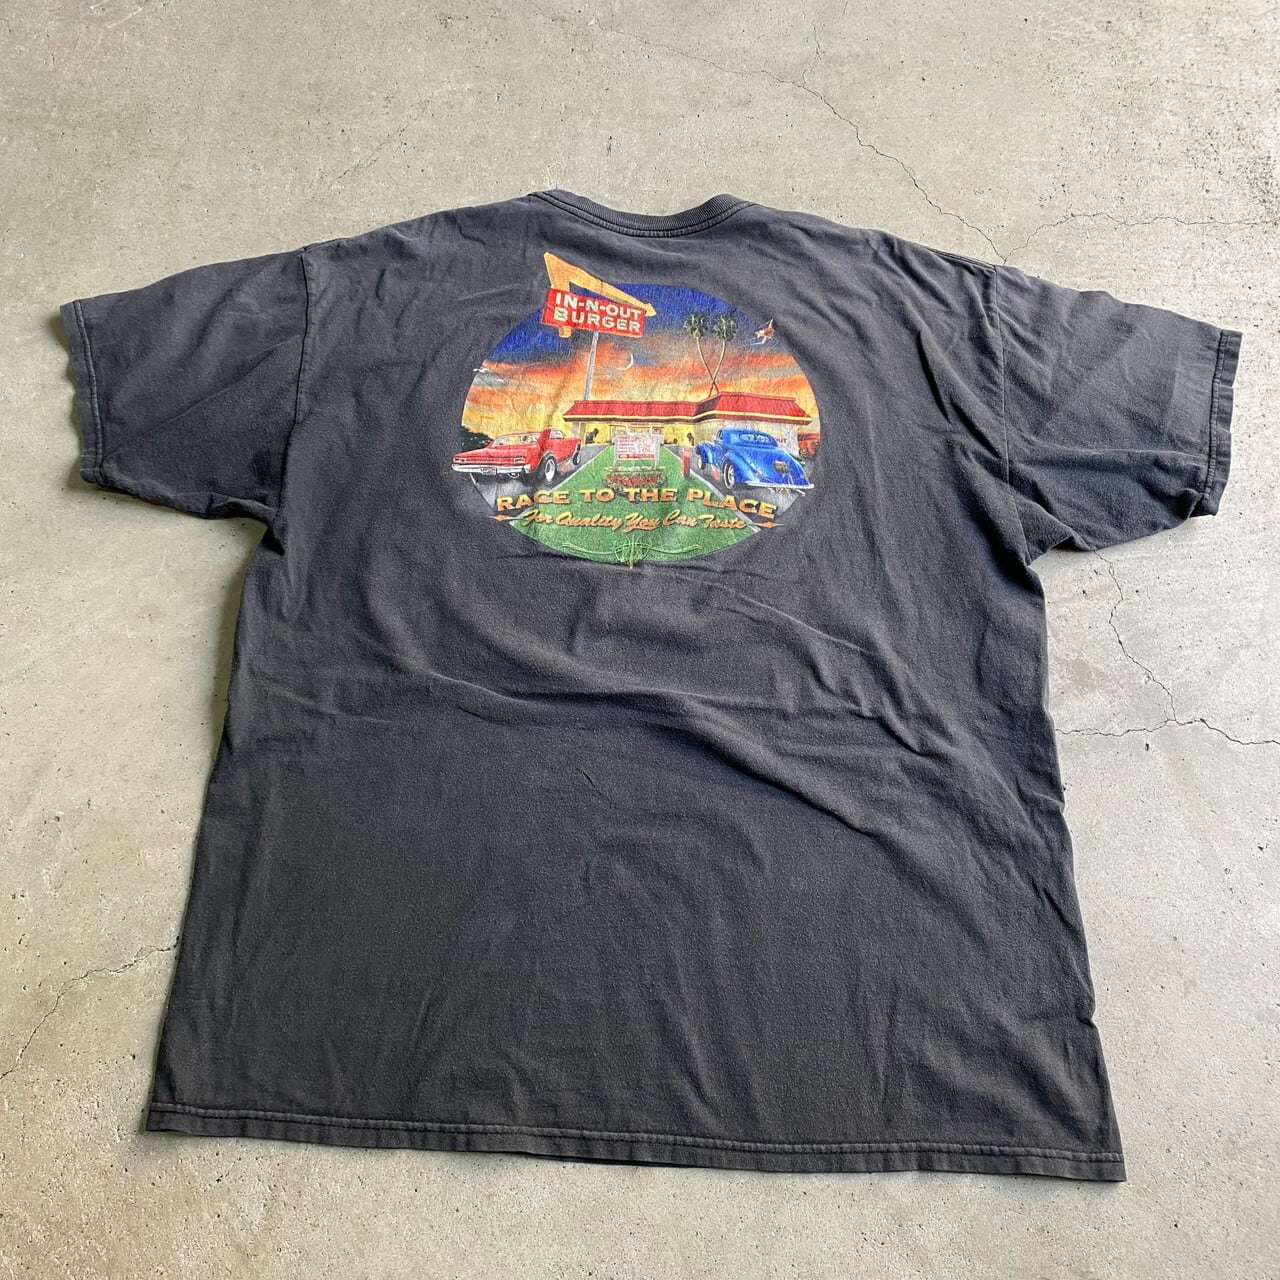 IN-N-OUT BURGER Anniversary 1948-2018 両面プリント アドバタイジングTシャツ メンズXL /eaa332615